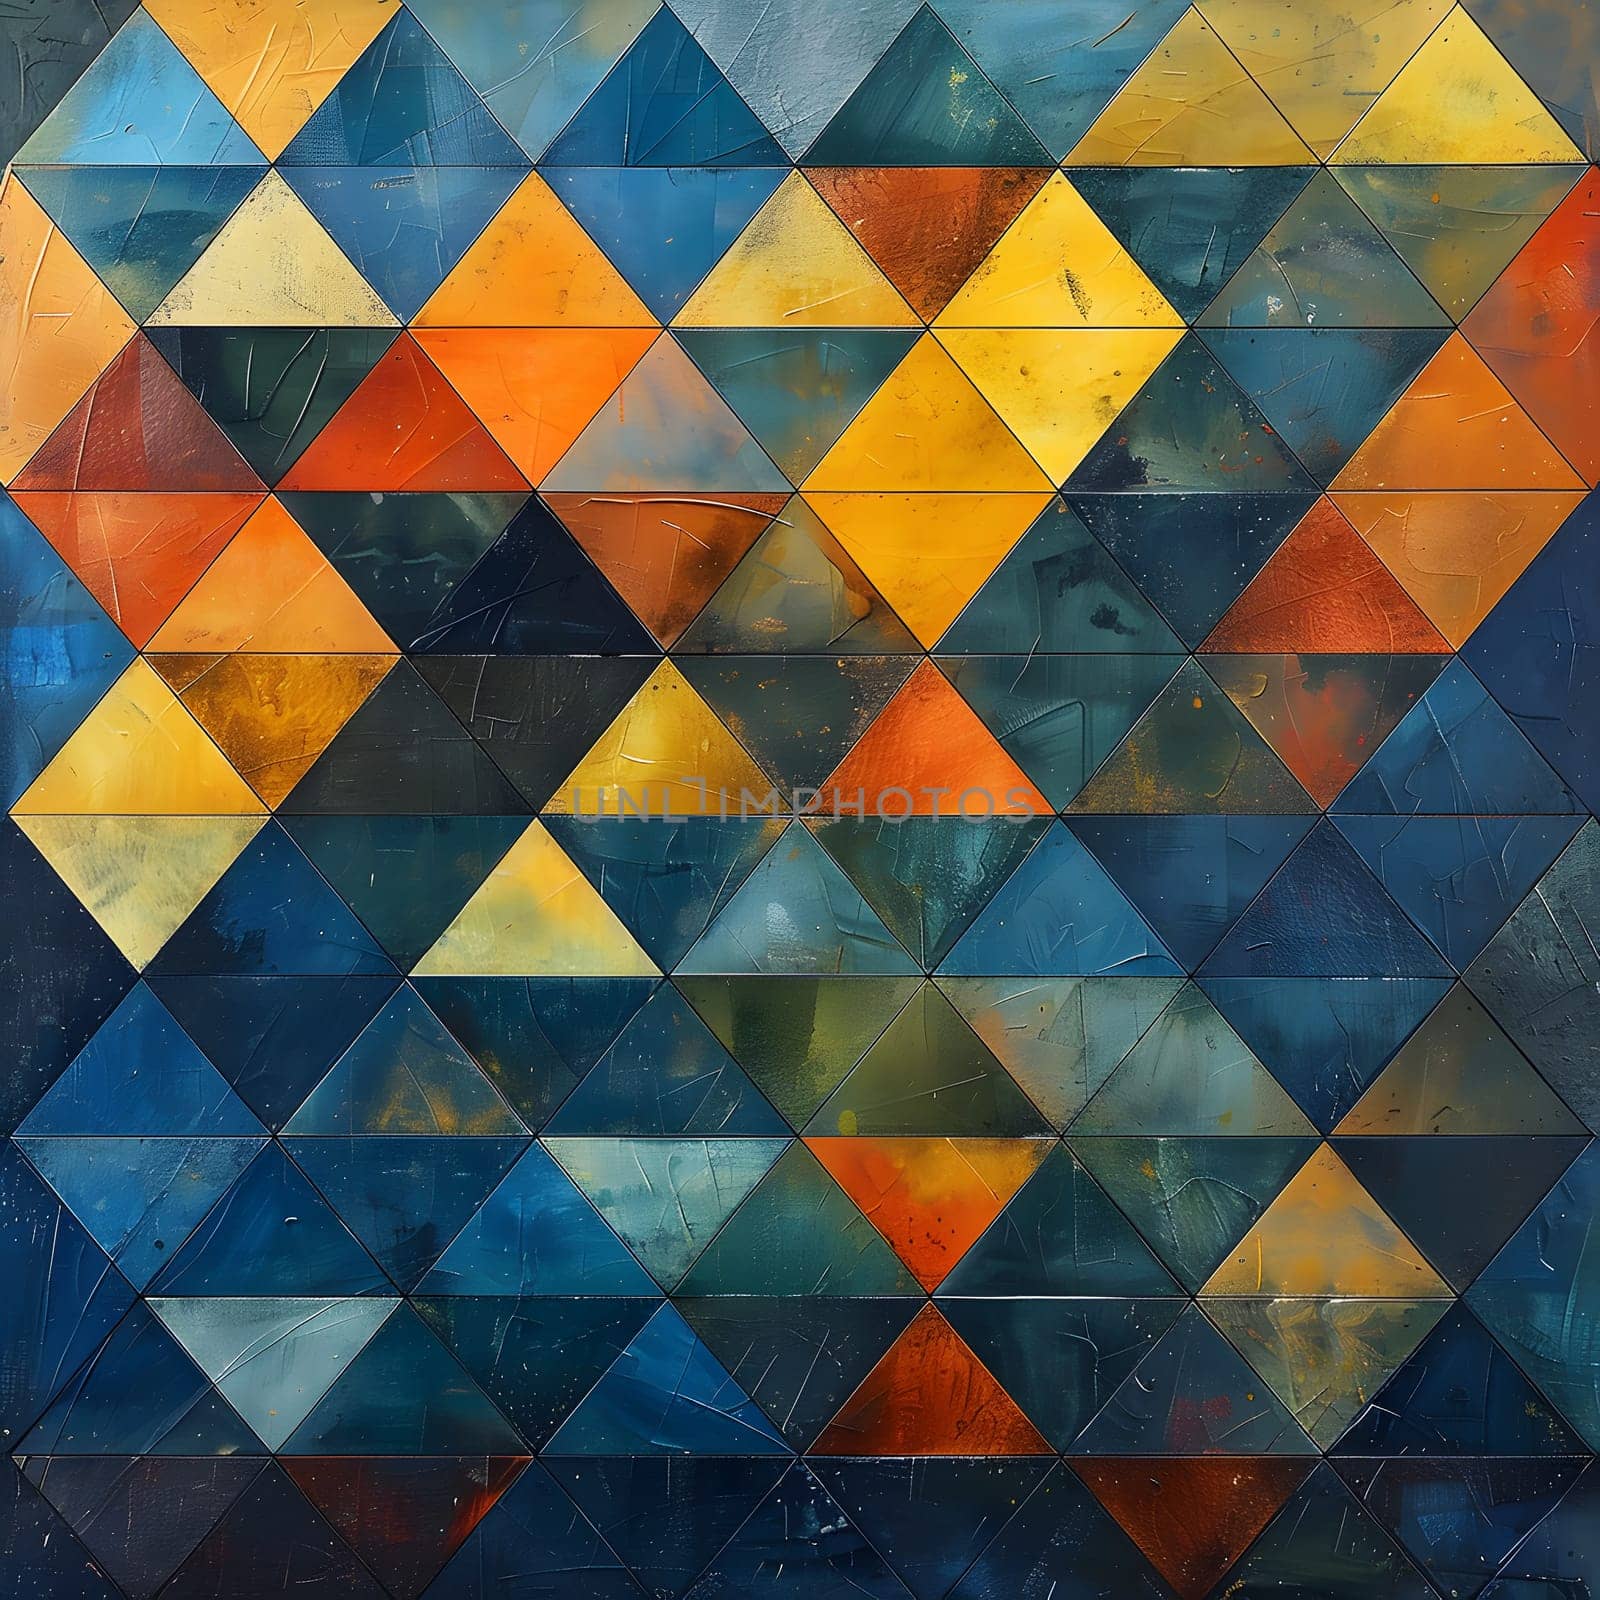 A vibrant geometric pattern of azure, orange, and grey triangles on a dark background, reminiscent of a modern textile art. Perfect for flooring or adding a pop of color to any room